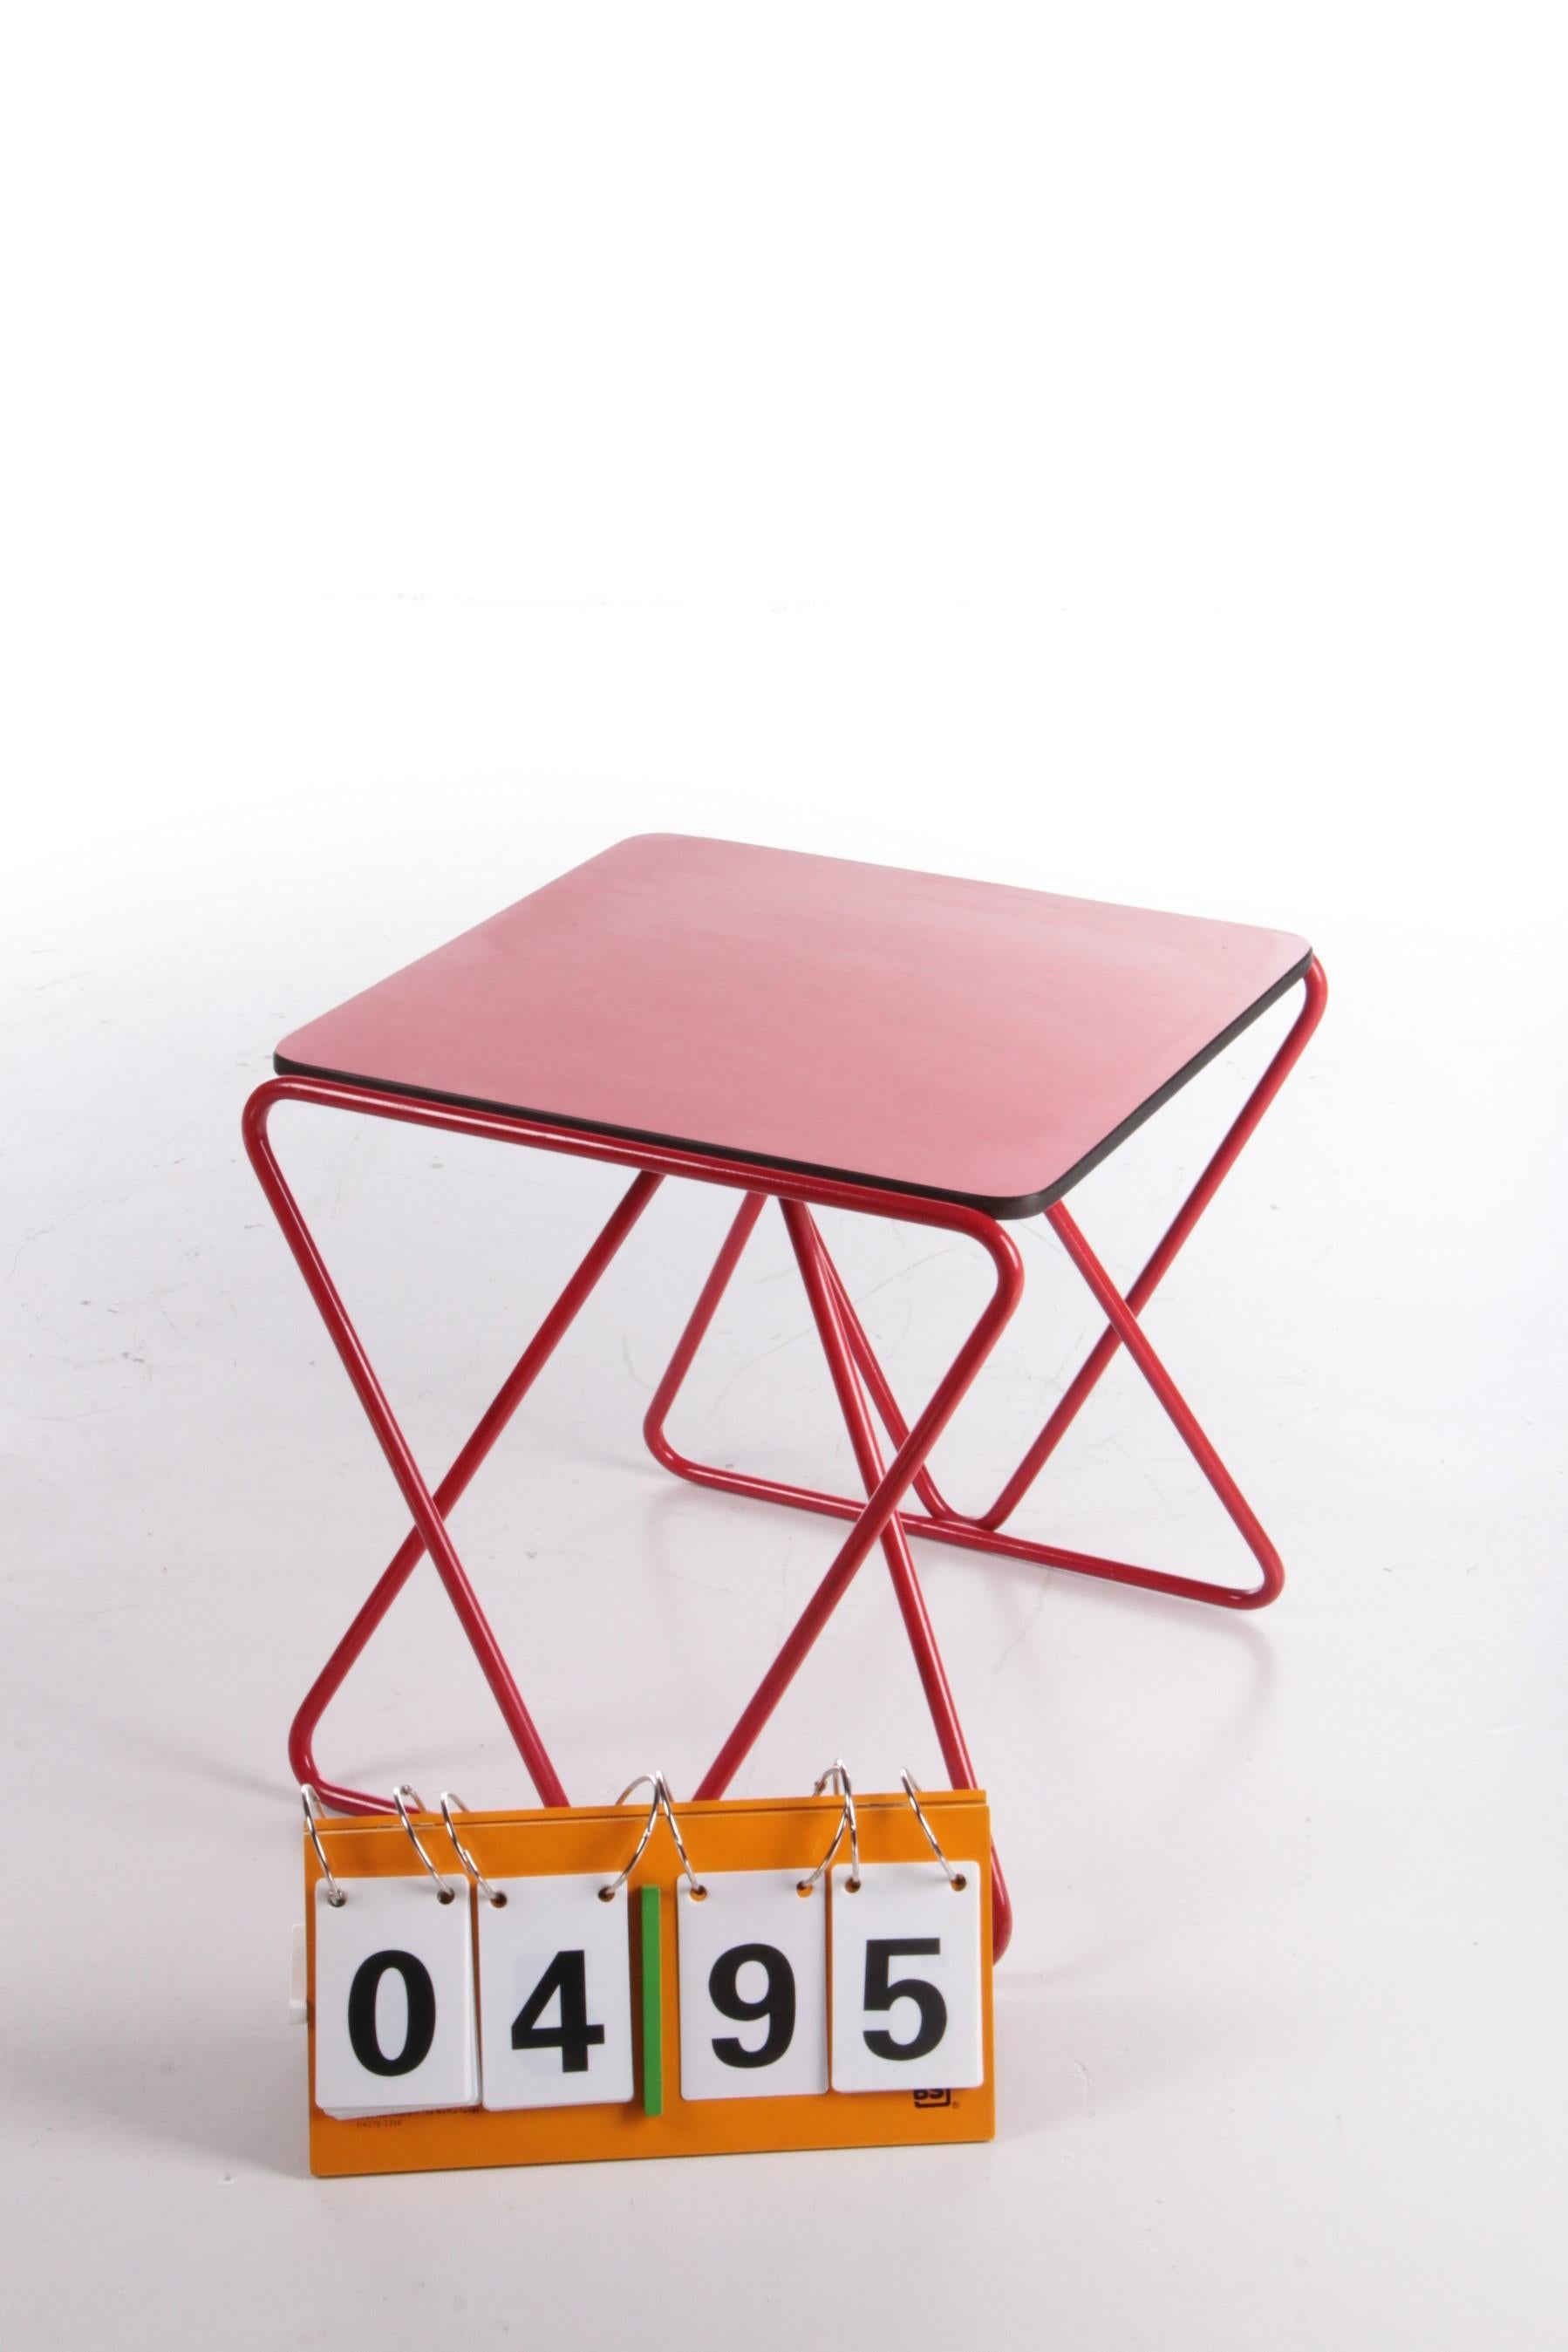 Dutch Rare Side Table Designed by Walter Antonis for I-Form, Holland, 1978 For Sale